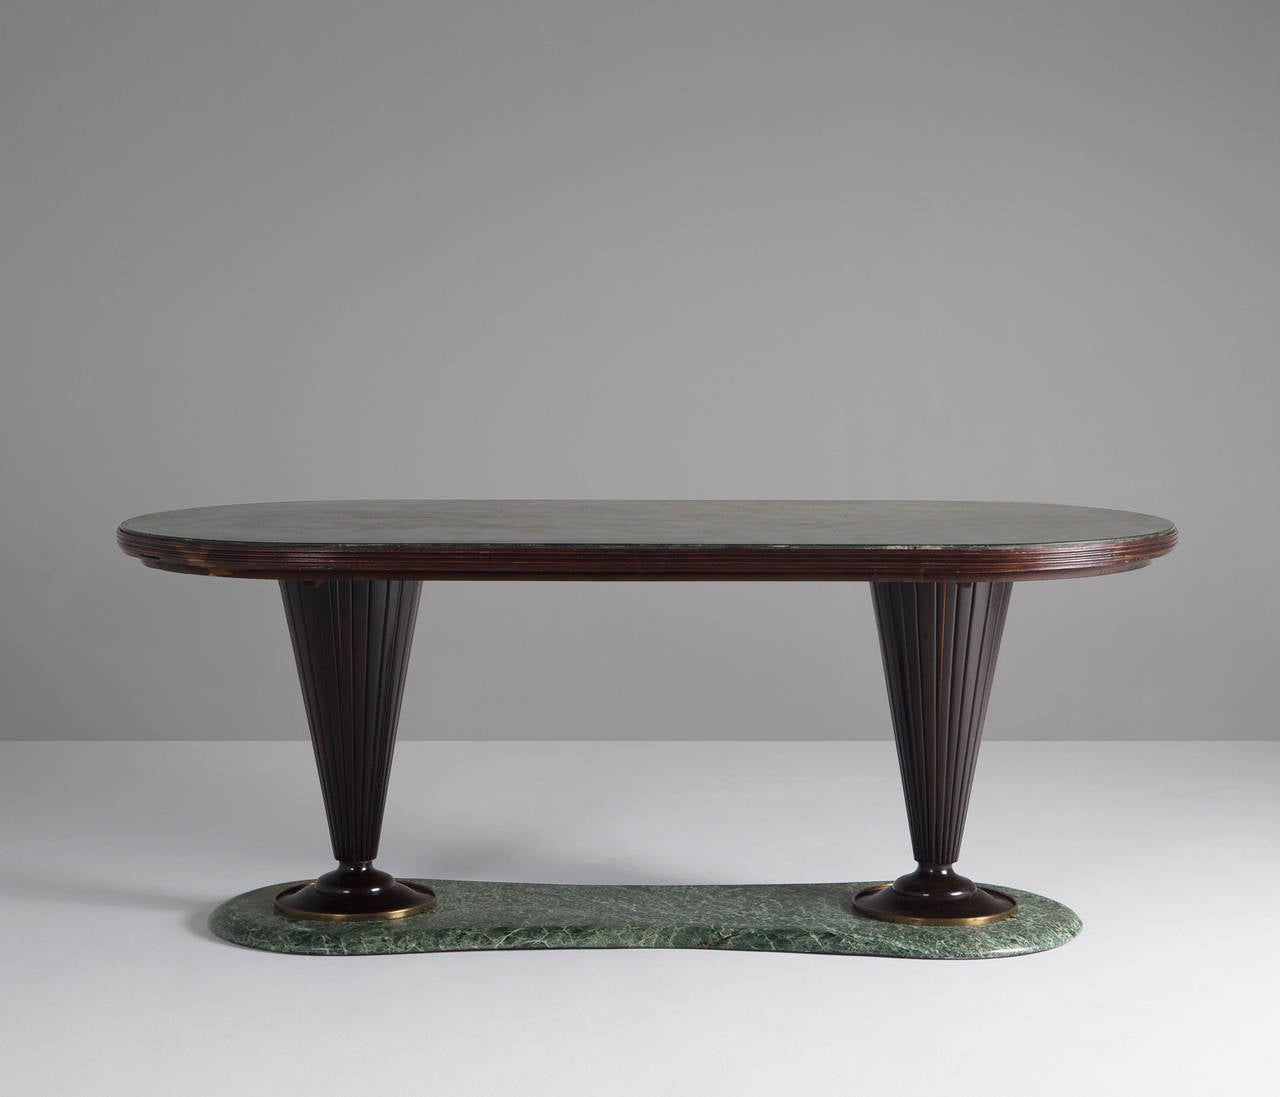 Table, in marble, wood and brass, by Vittorio Dassi, Italy, 1950s.

Elegant dining or centre table by Vittorio Dassi with an Alpi Verdi marble top and base, which matches perfectly with the elegant designed tapered legs. The stunning woodwork,